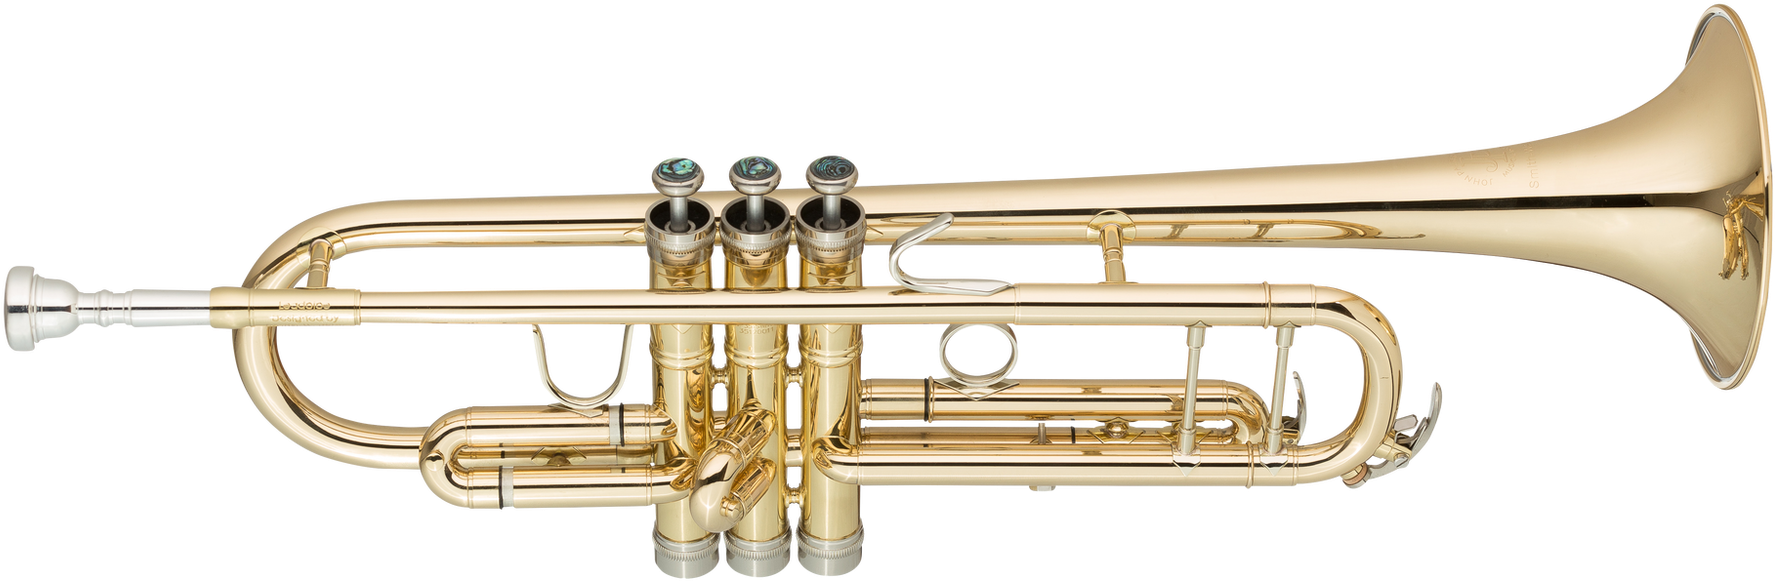 Brass Trumpet Isolatedon Background PNG image